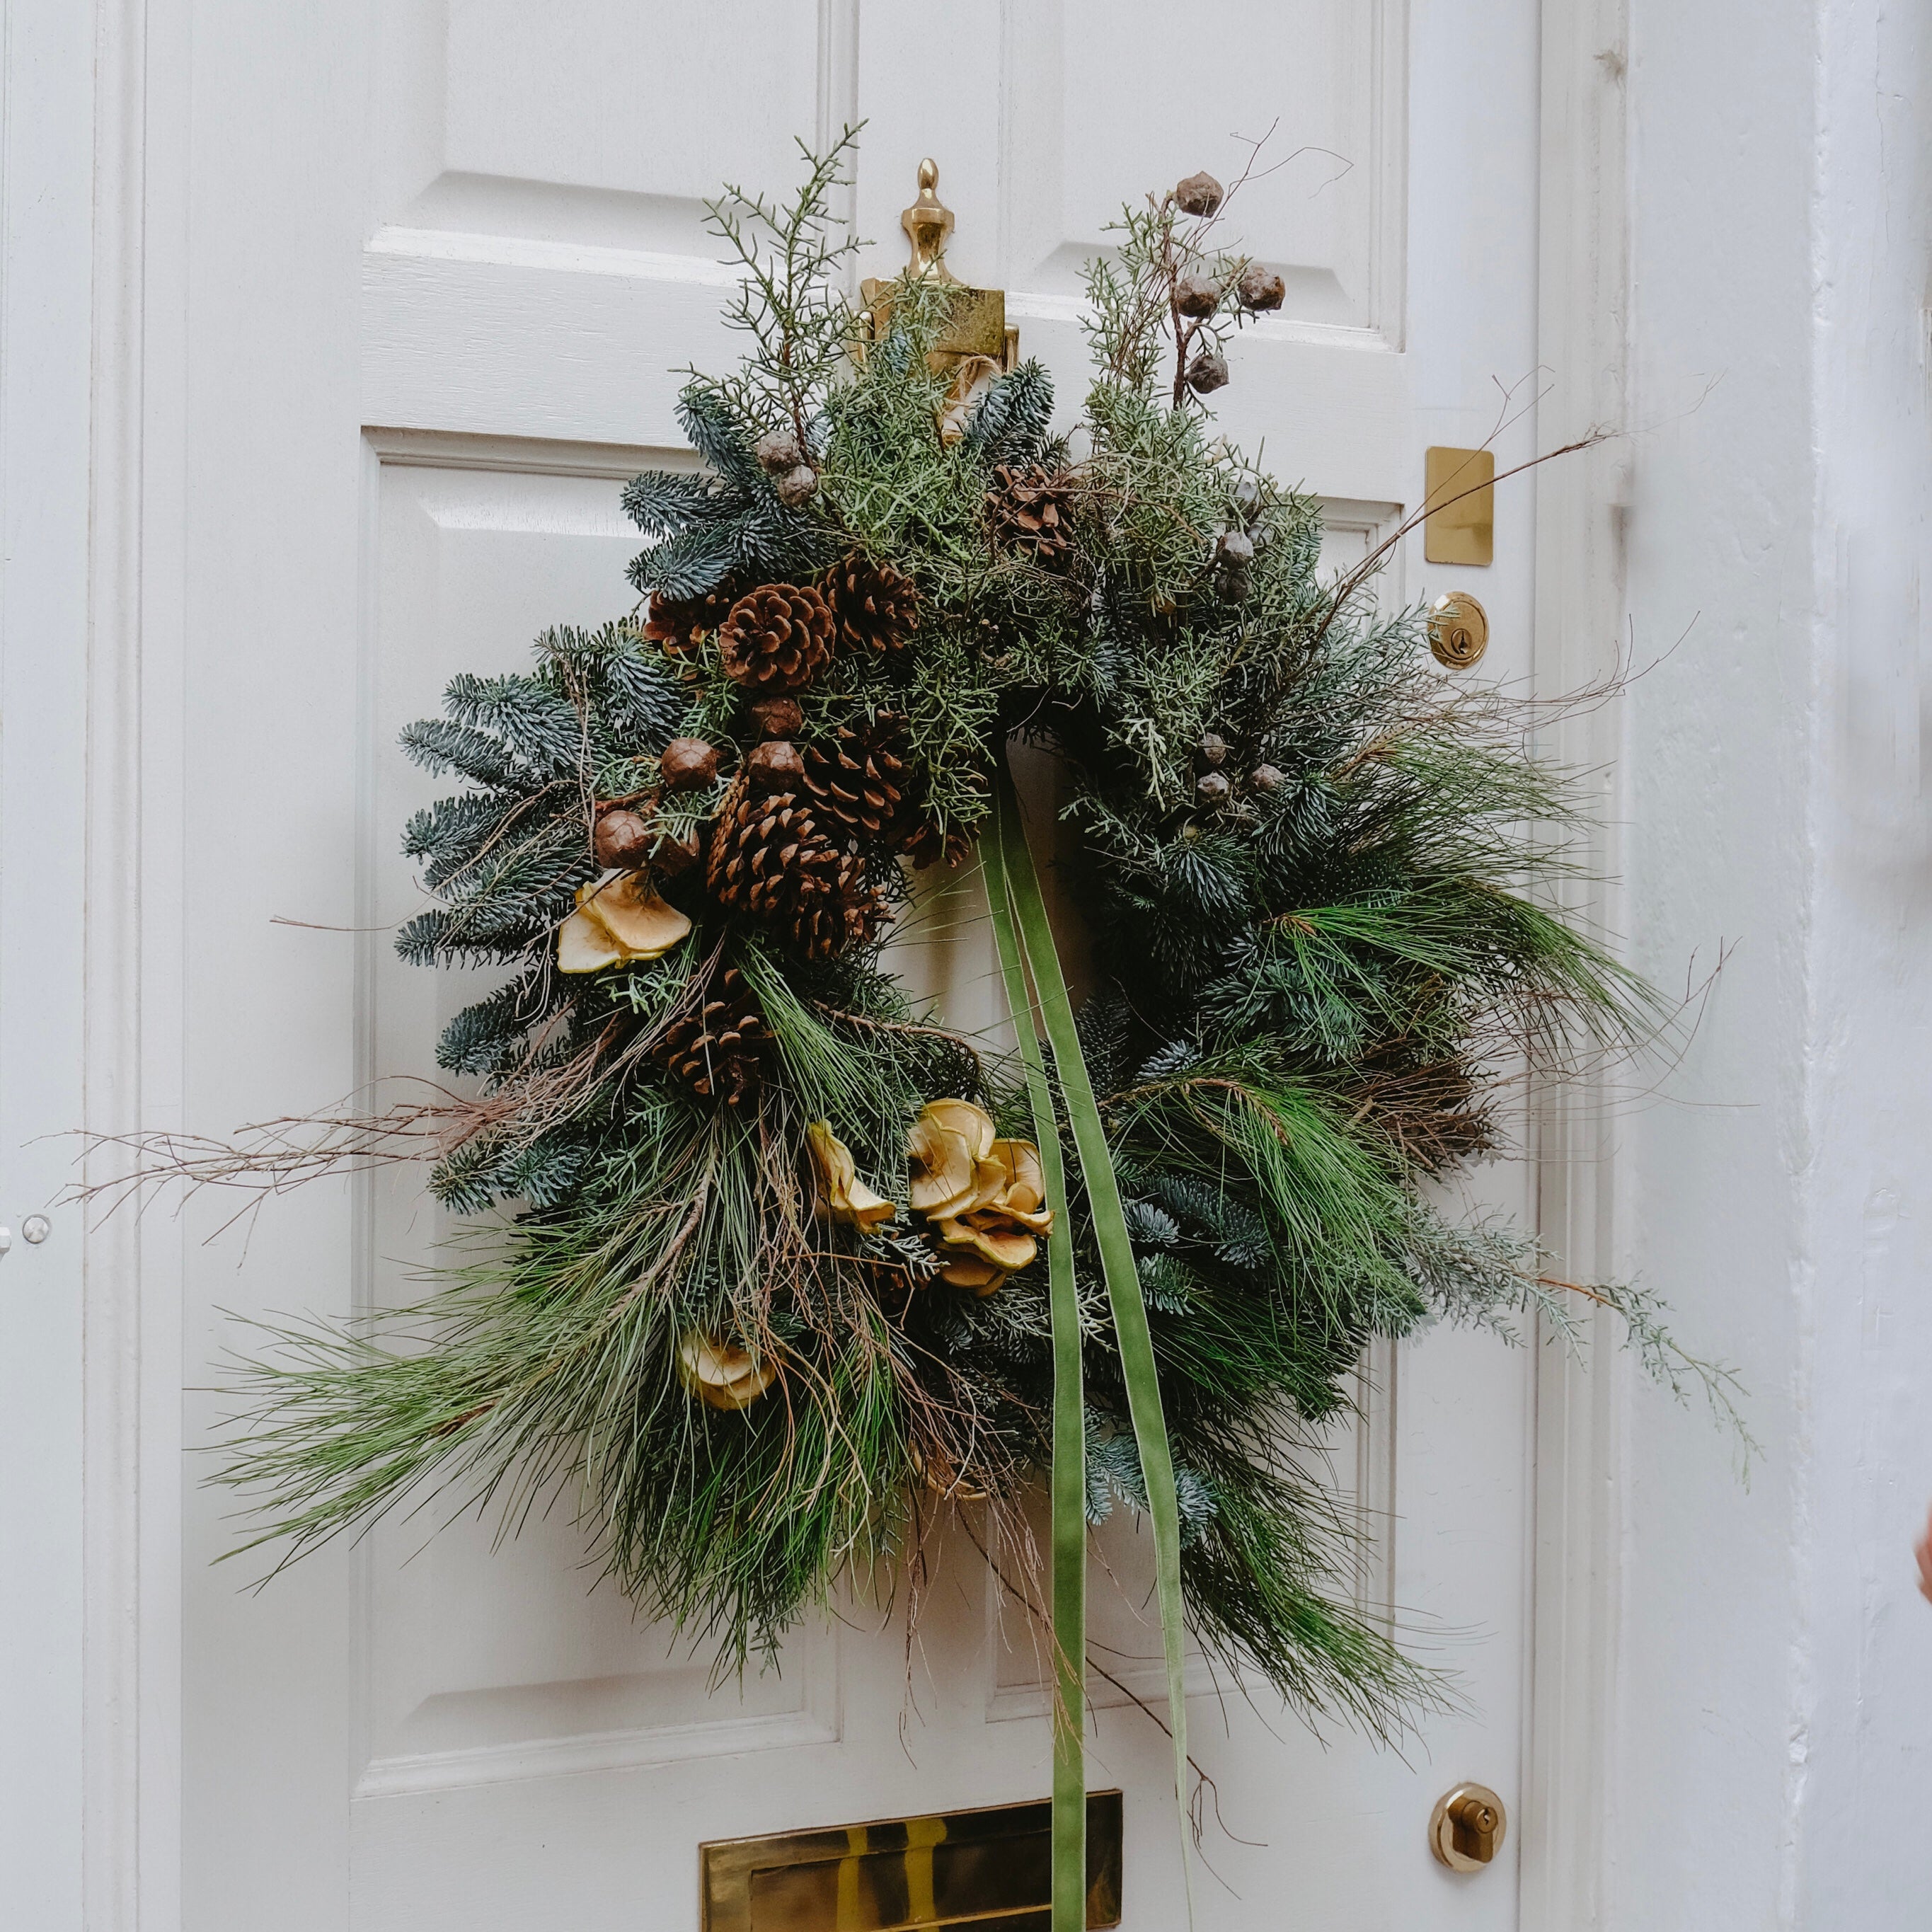 festive Christmas wreath to buy online for delivery in London and UK. Made with pine cones and festive foliage